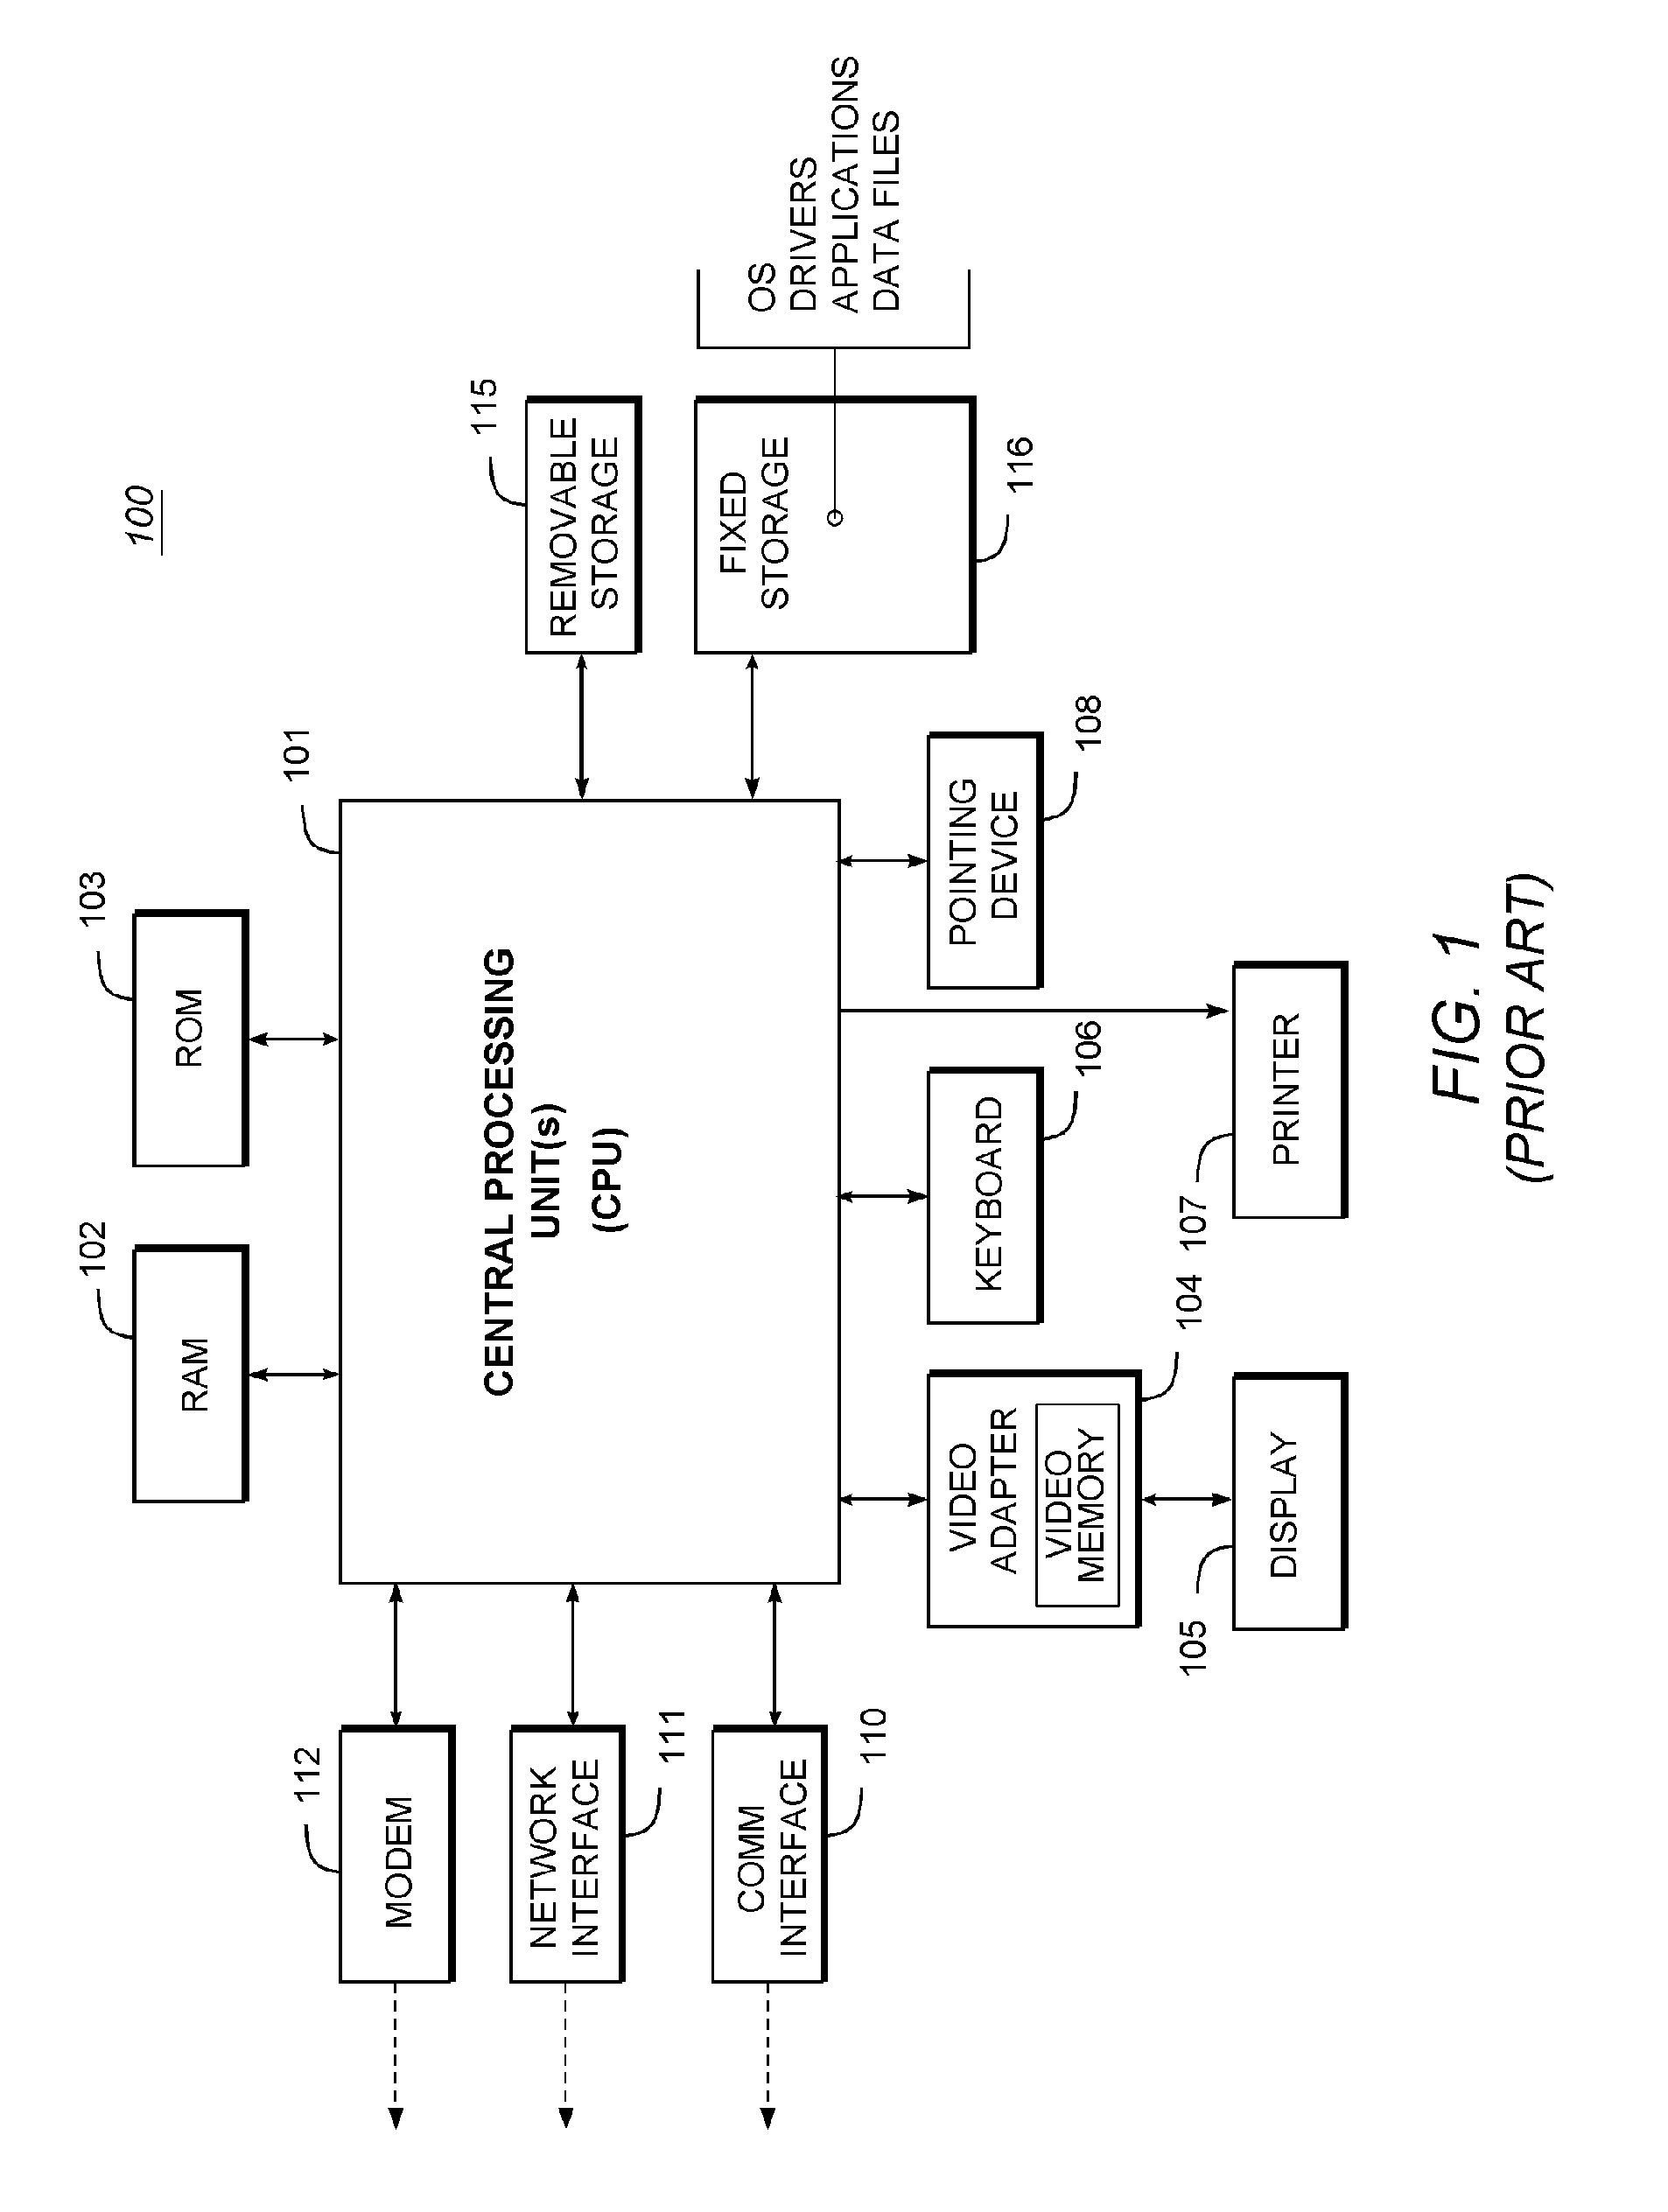 System Providing Methodology for Securing Interfaces of Executable Files